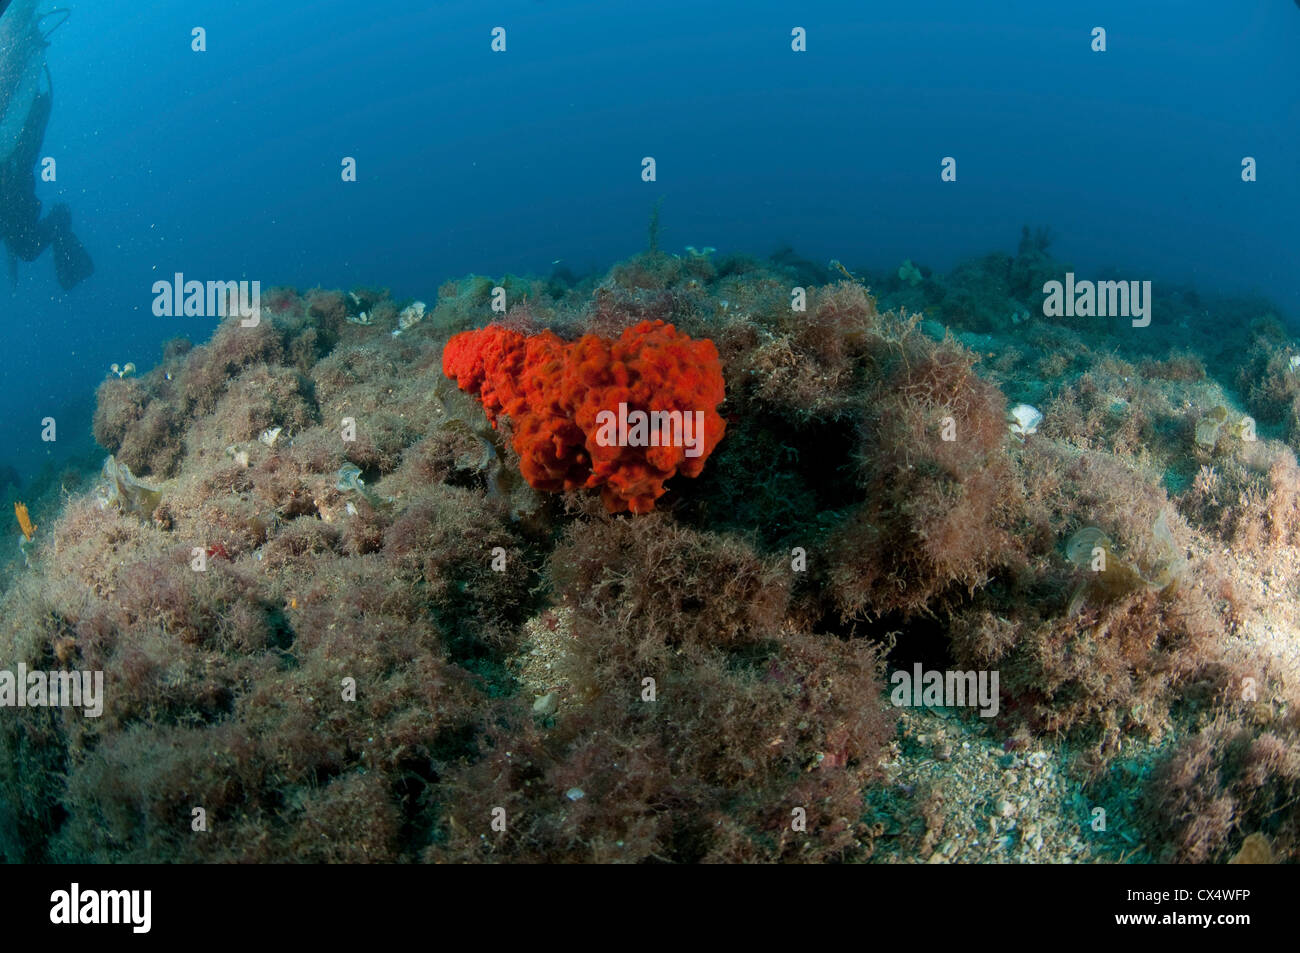 Boring sponge or red ball sponge (Cliona vastifica) photographed in the Mediterranean sea off the coast of Israel Stock Photo